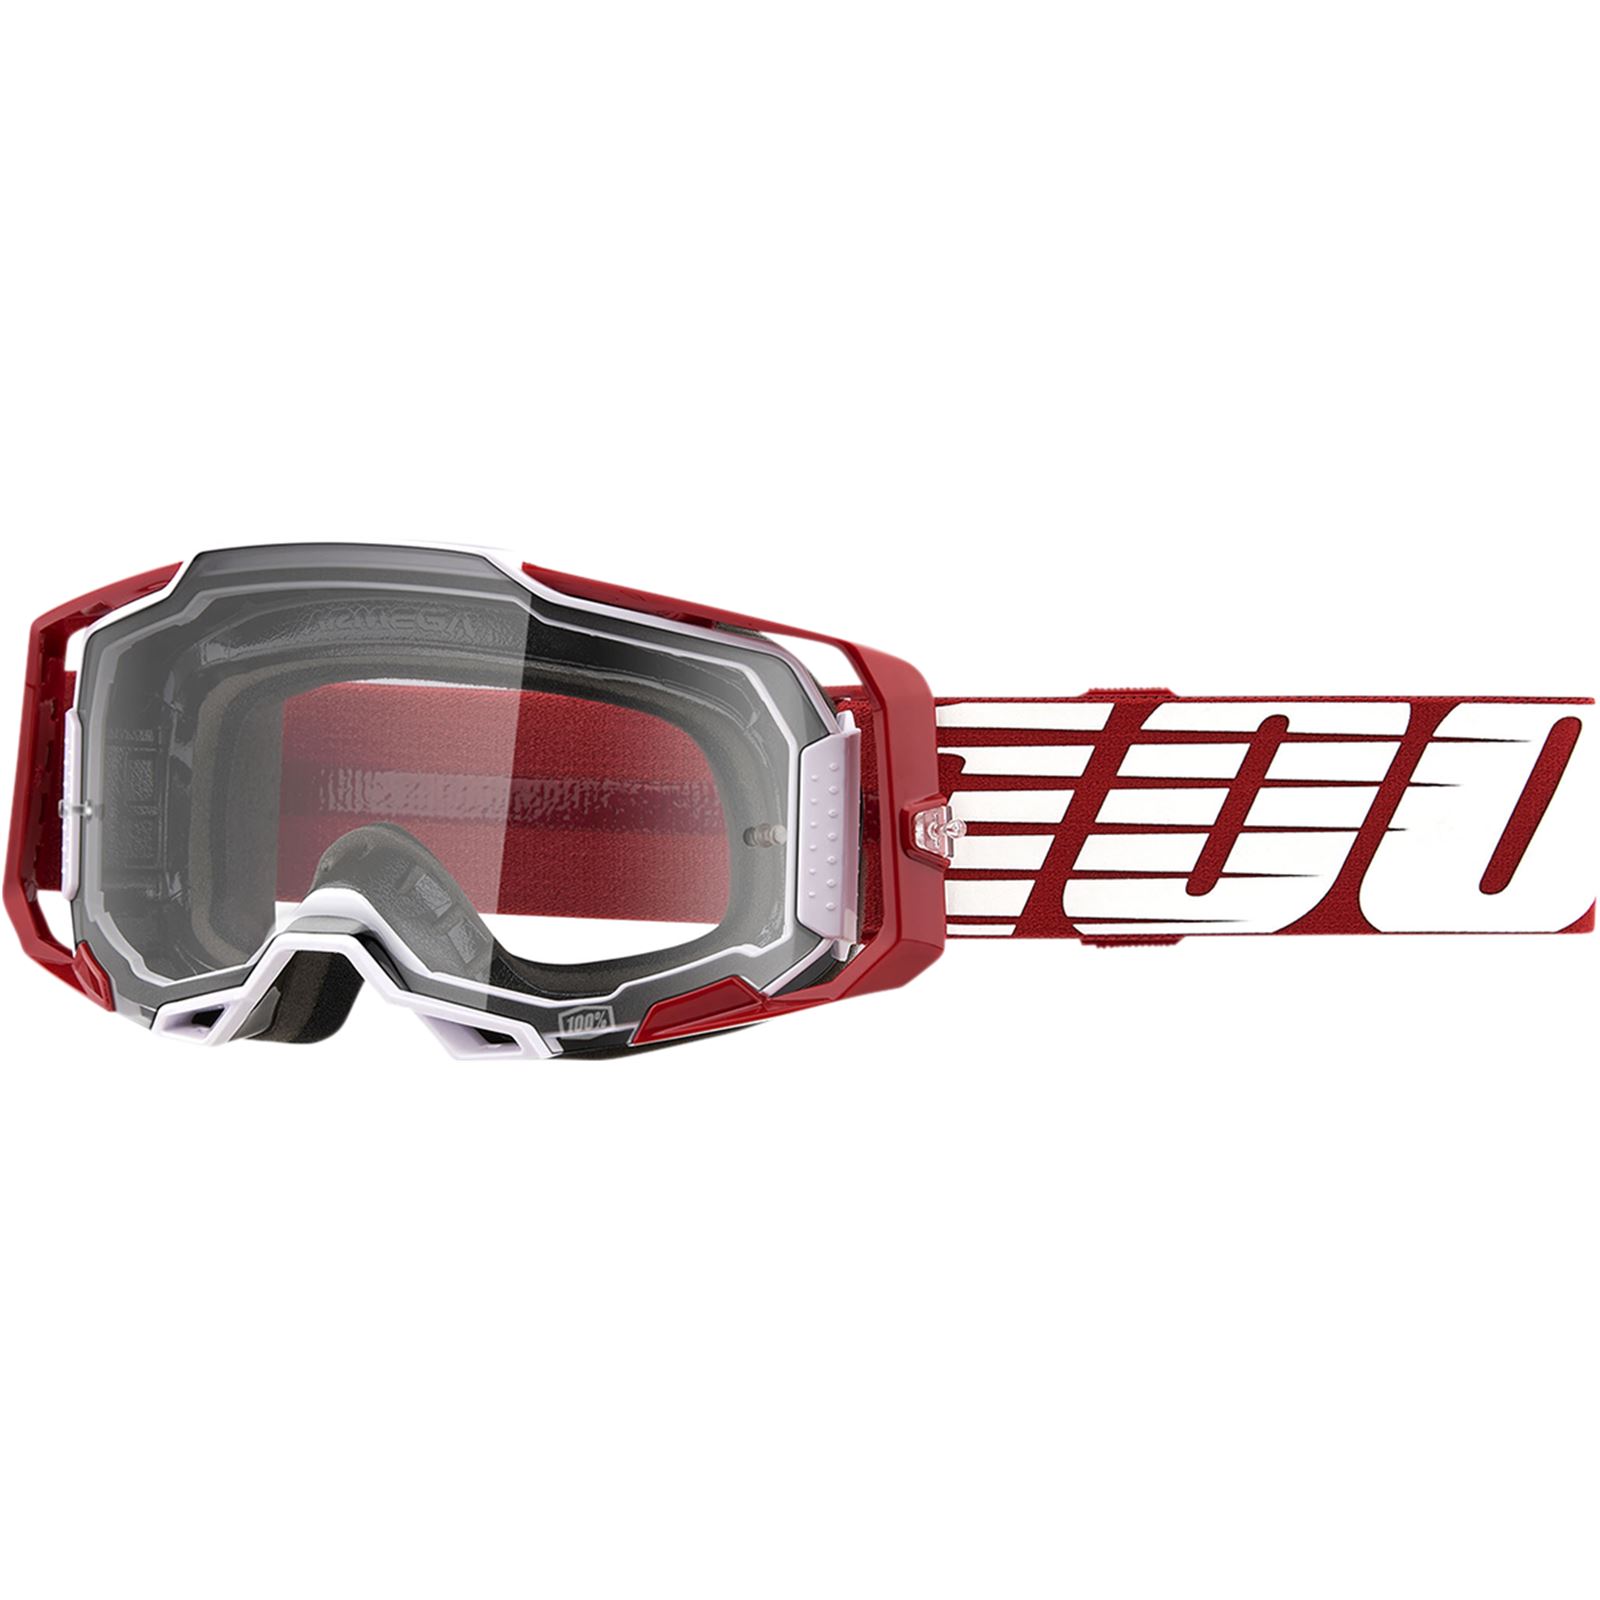 100% Armega Goggles - Oversized Deep Red - Clear